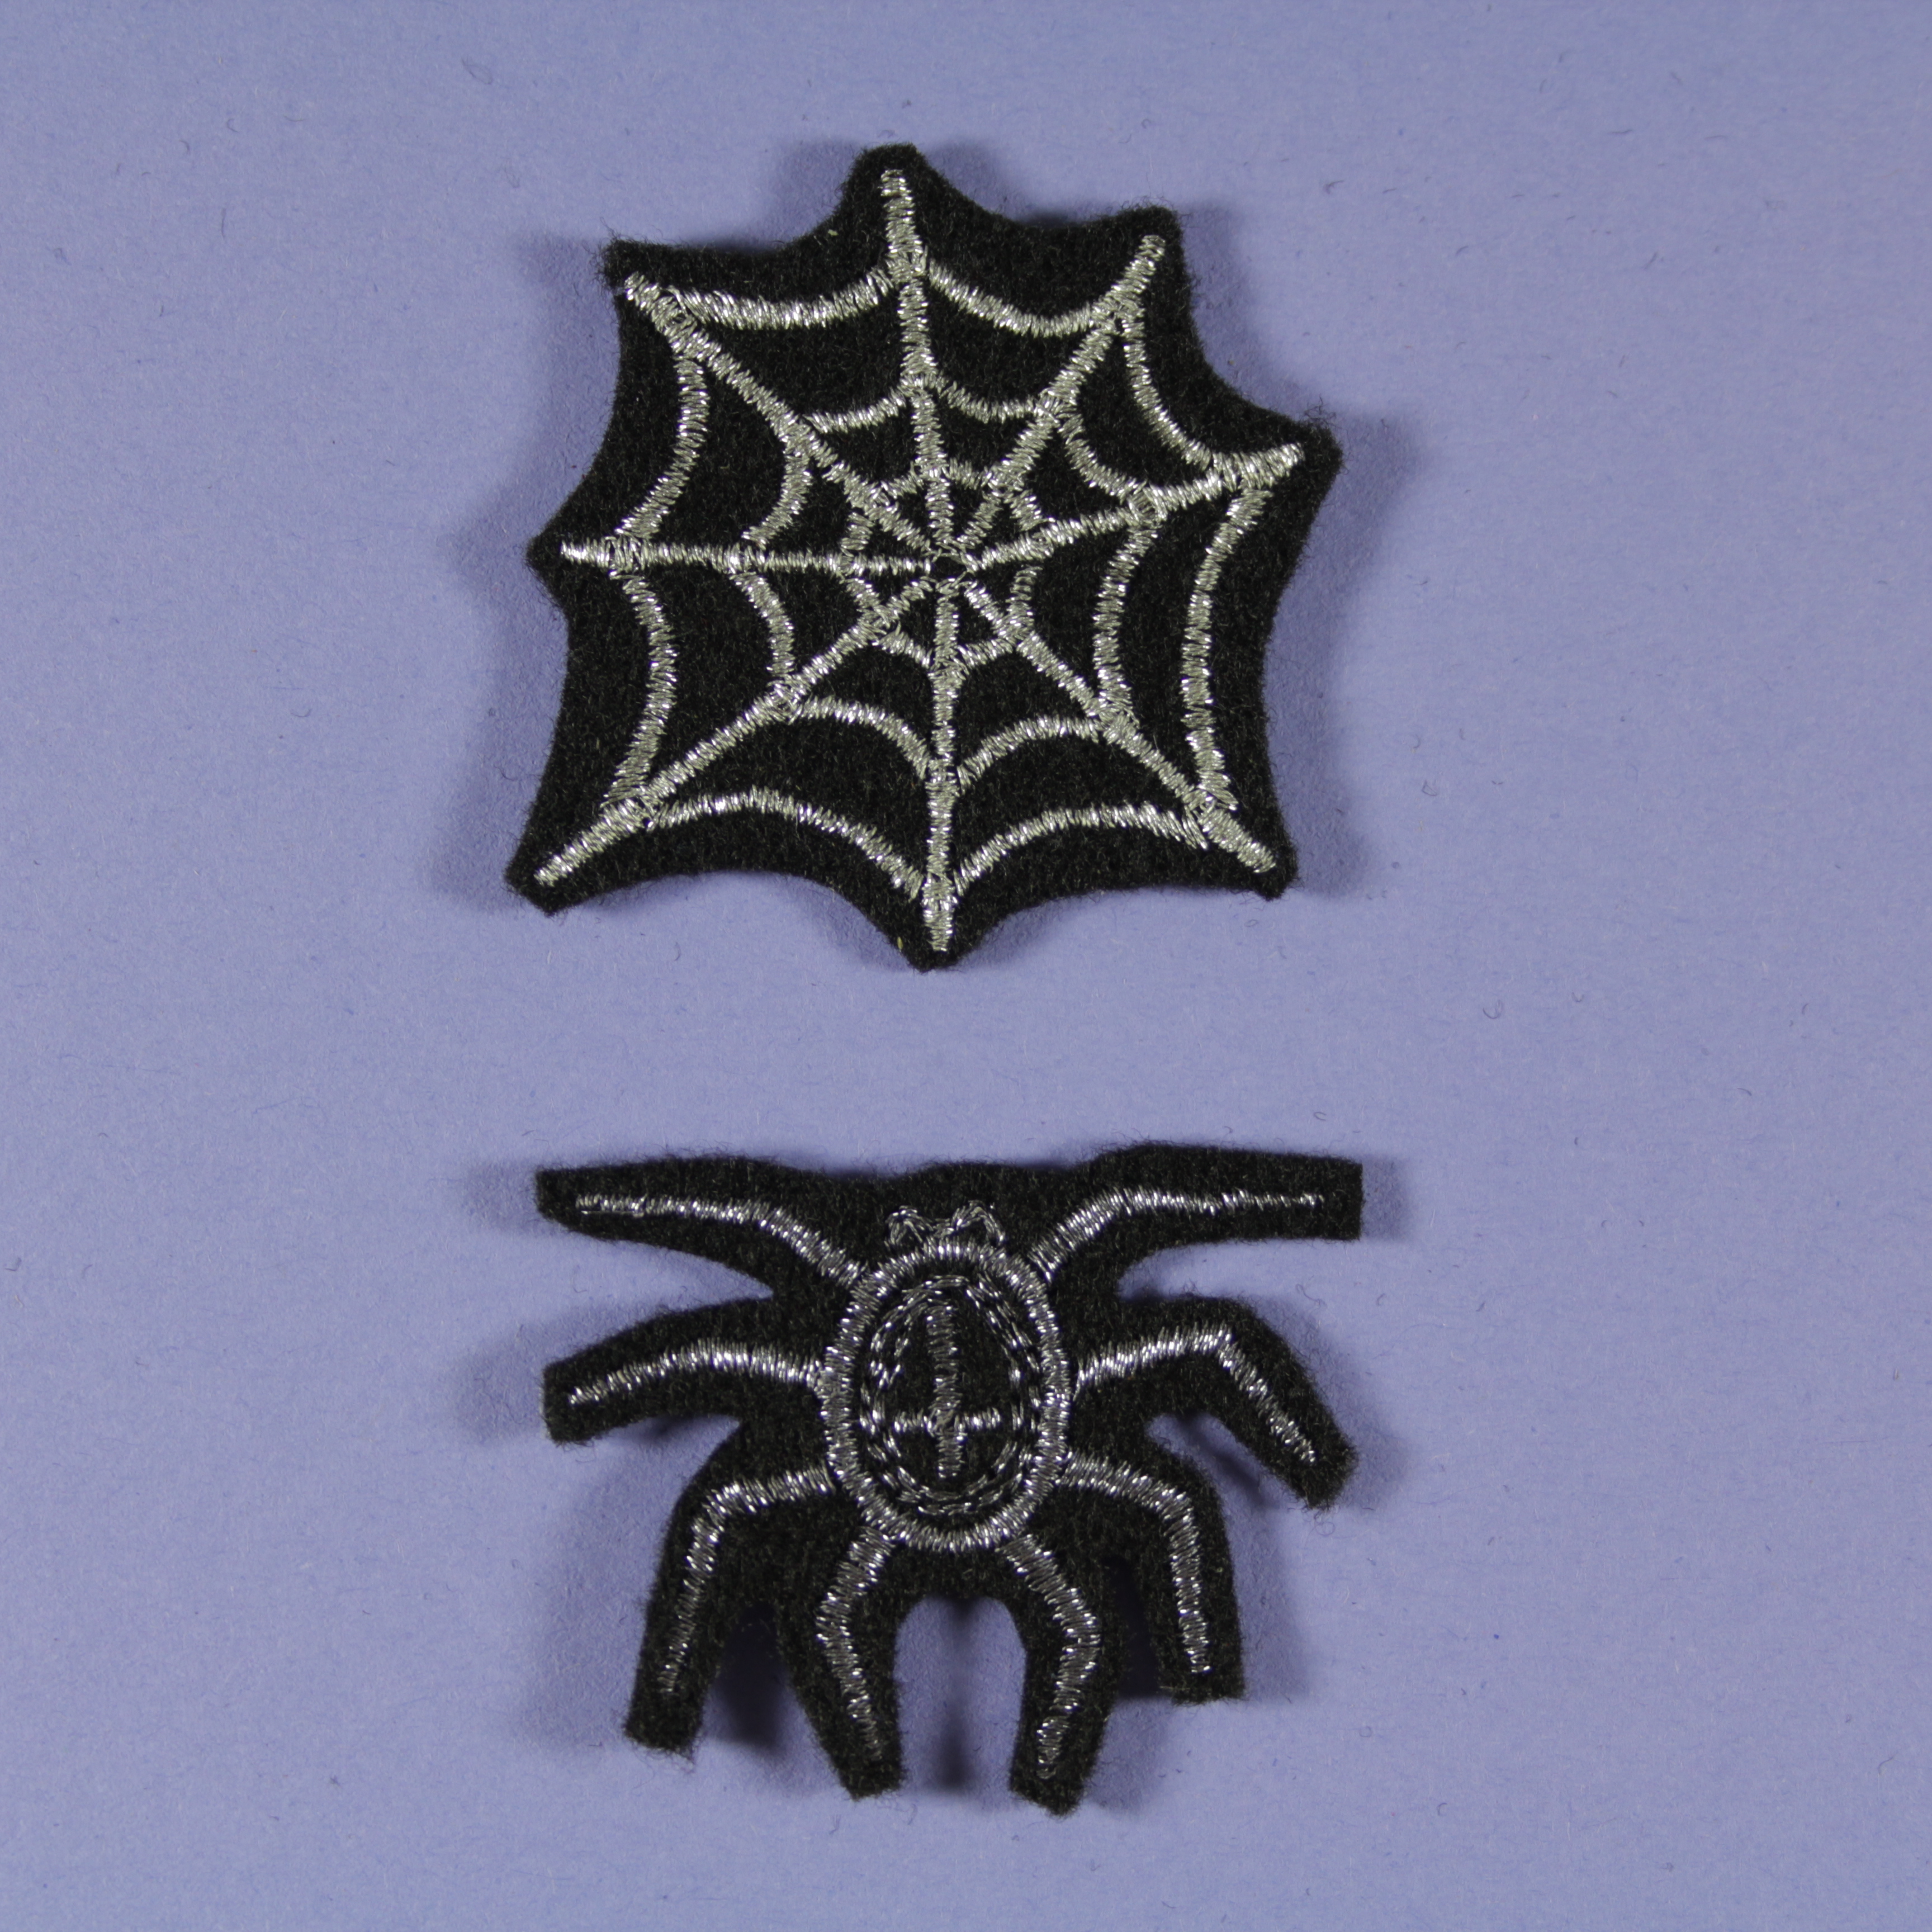 Spider & spider web iron-on images glitter set two mini silver iron-ons spider